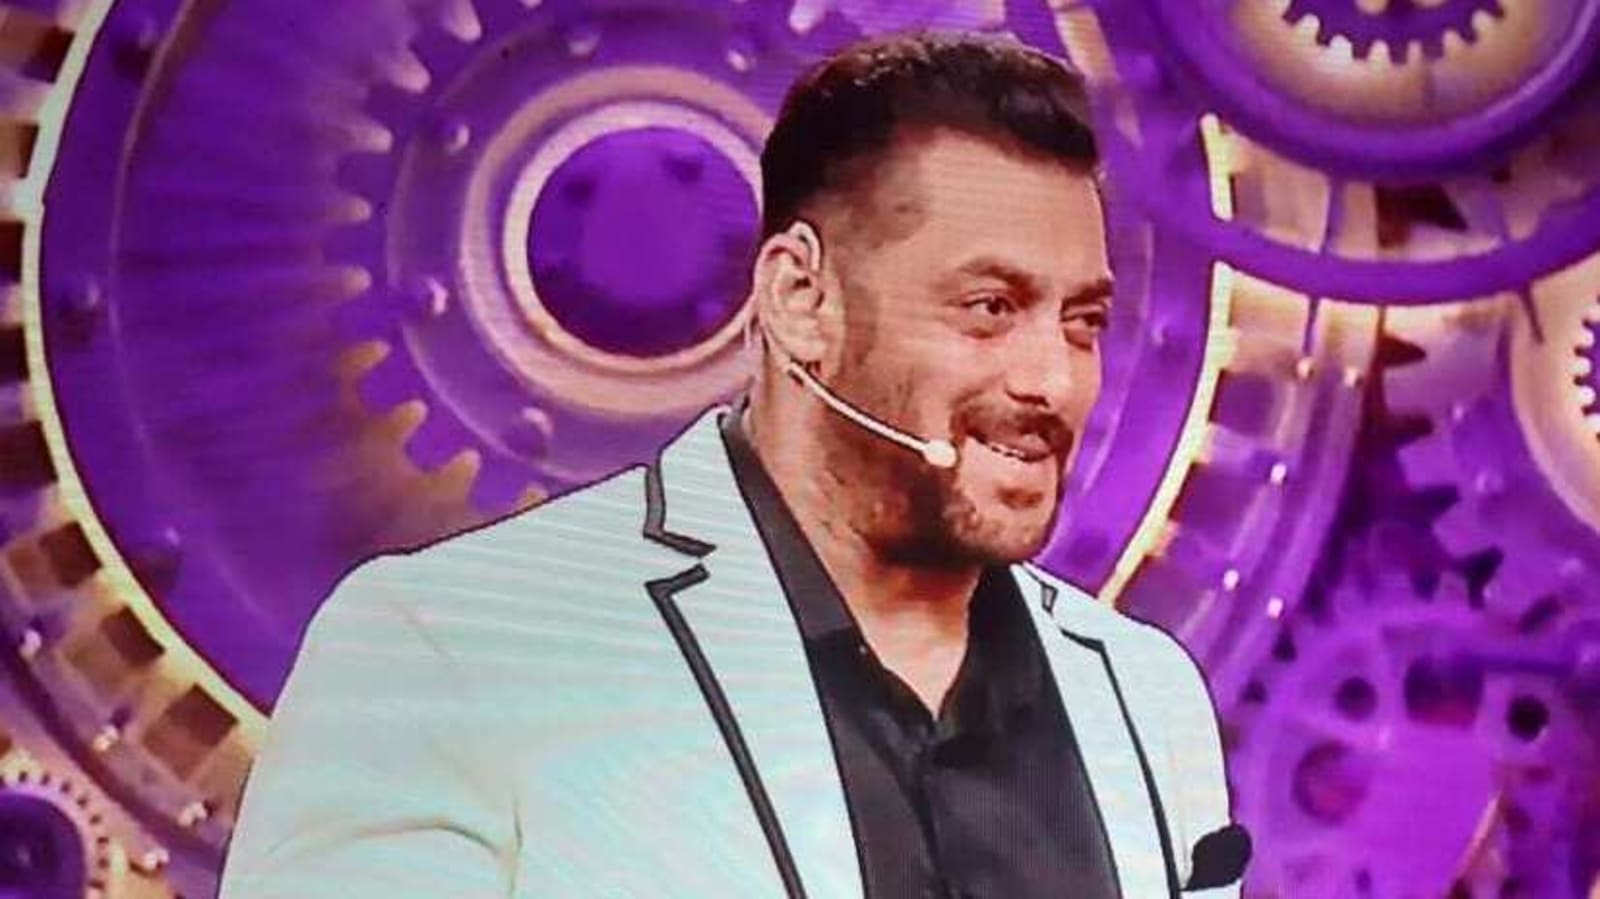 Bigg Boss 14 grand finale opens with Salman Khan announcing that voting